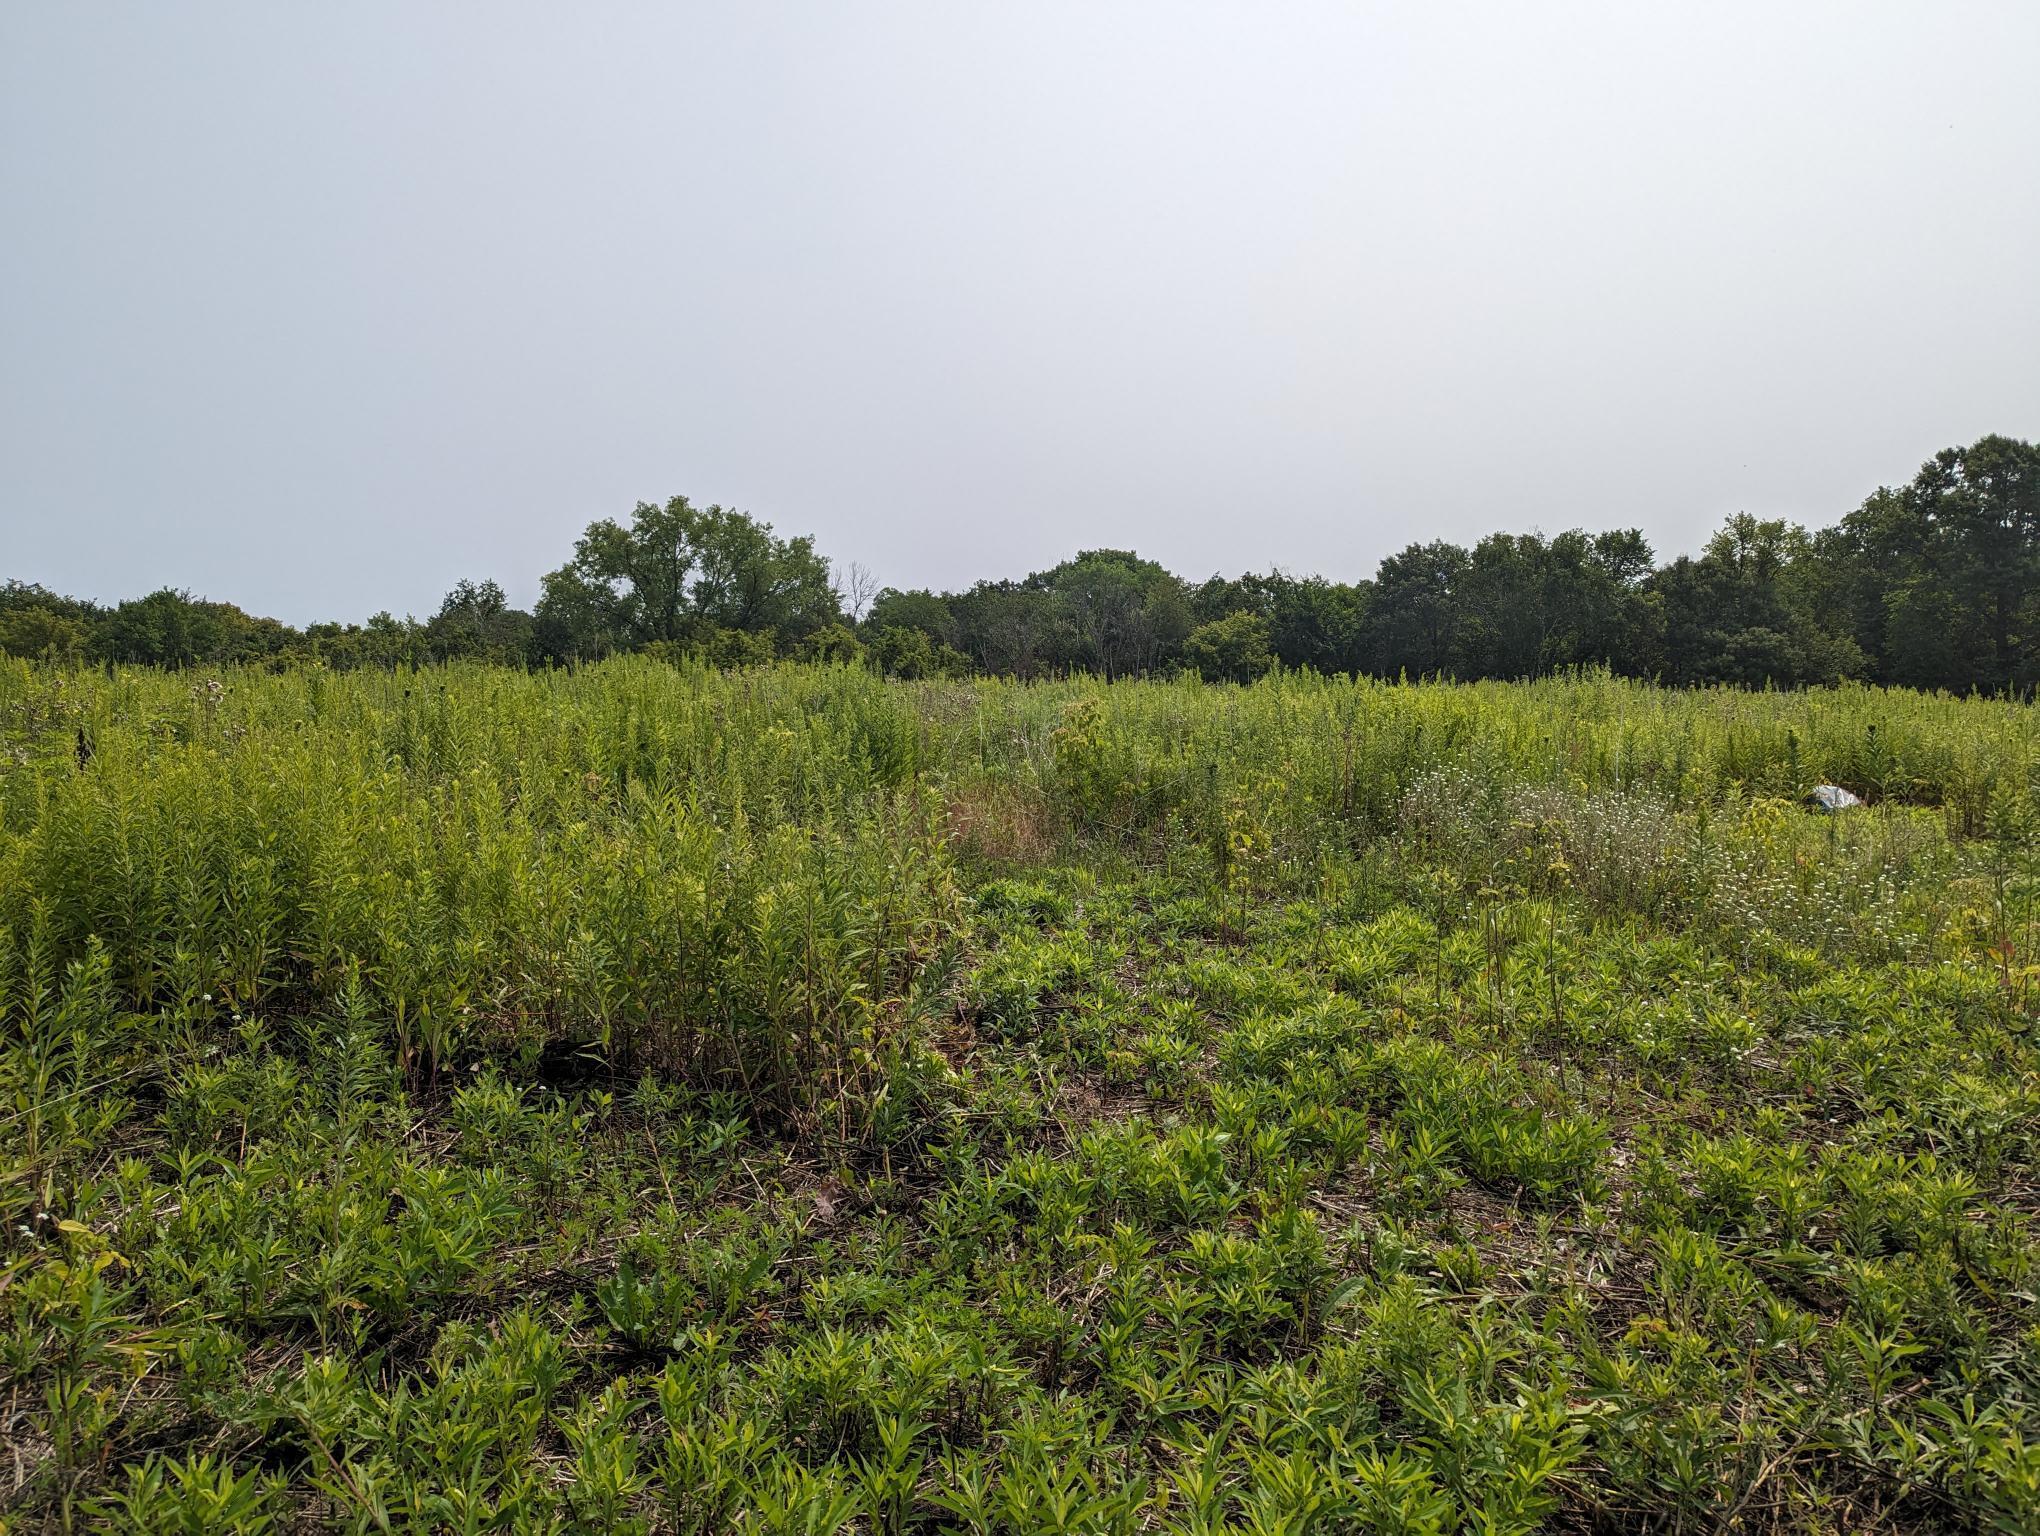 11 ACRES OF TILLED LAND PERFECT FOR YOUR DREAM HOME TO BE BUILT.